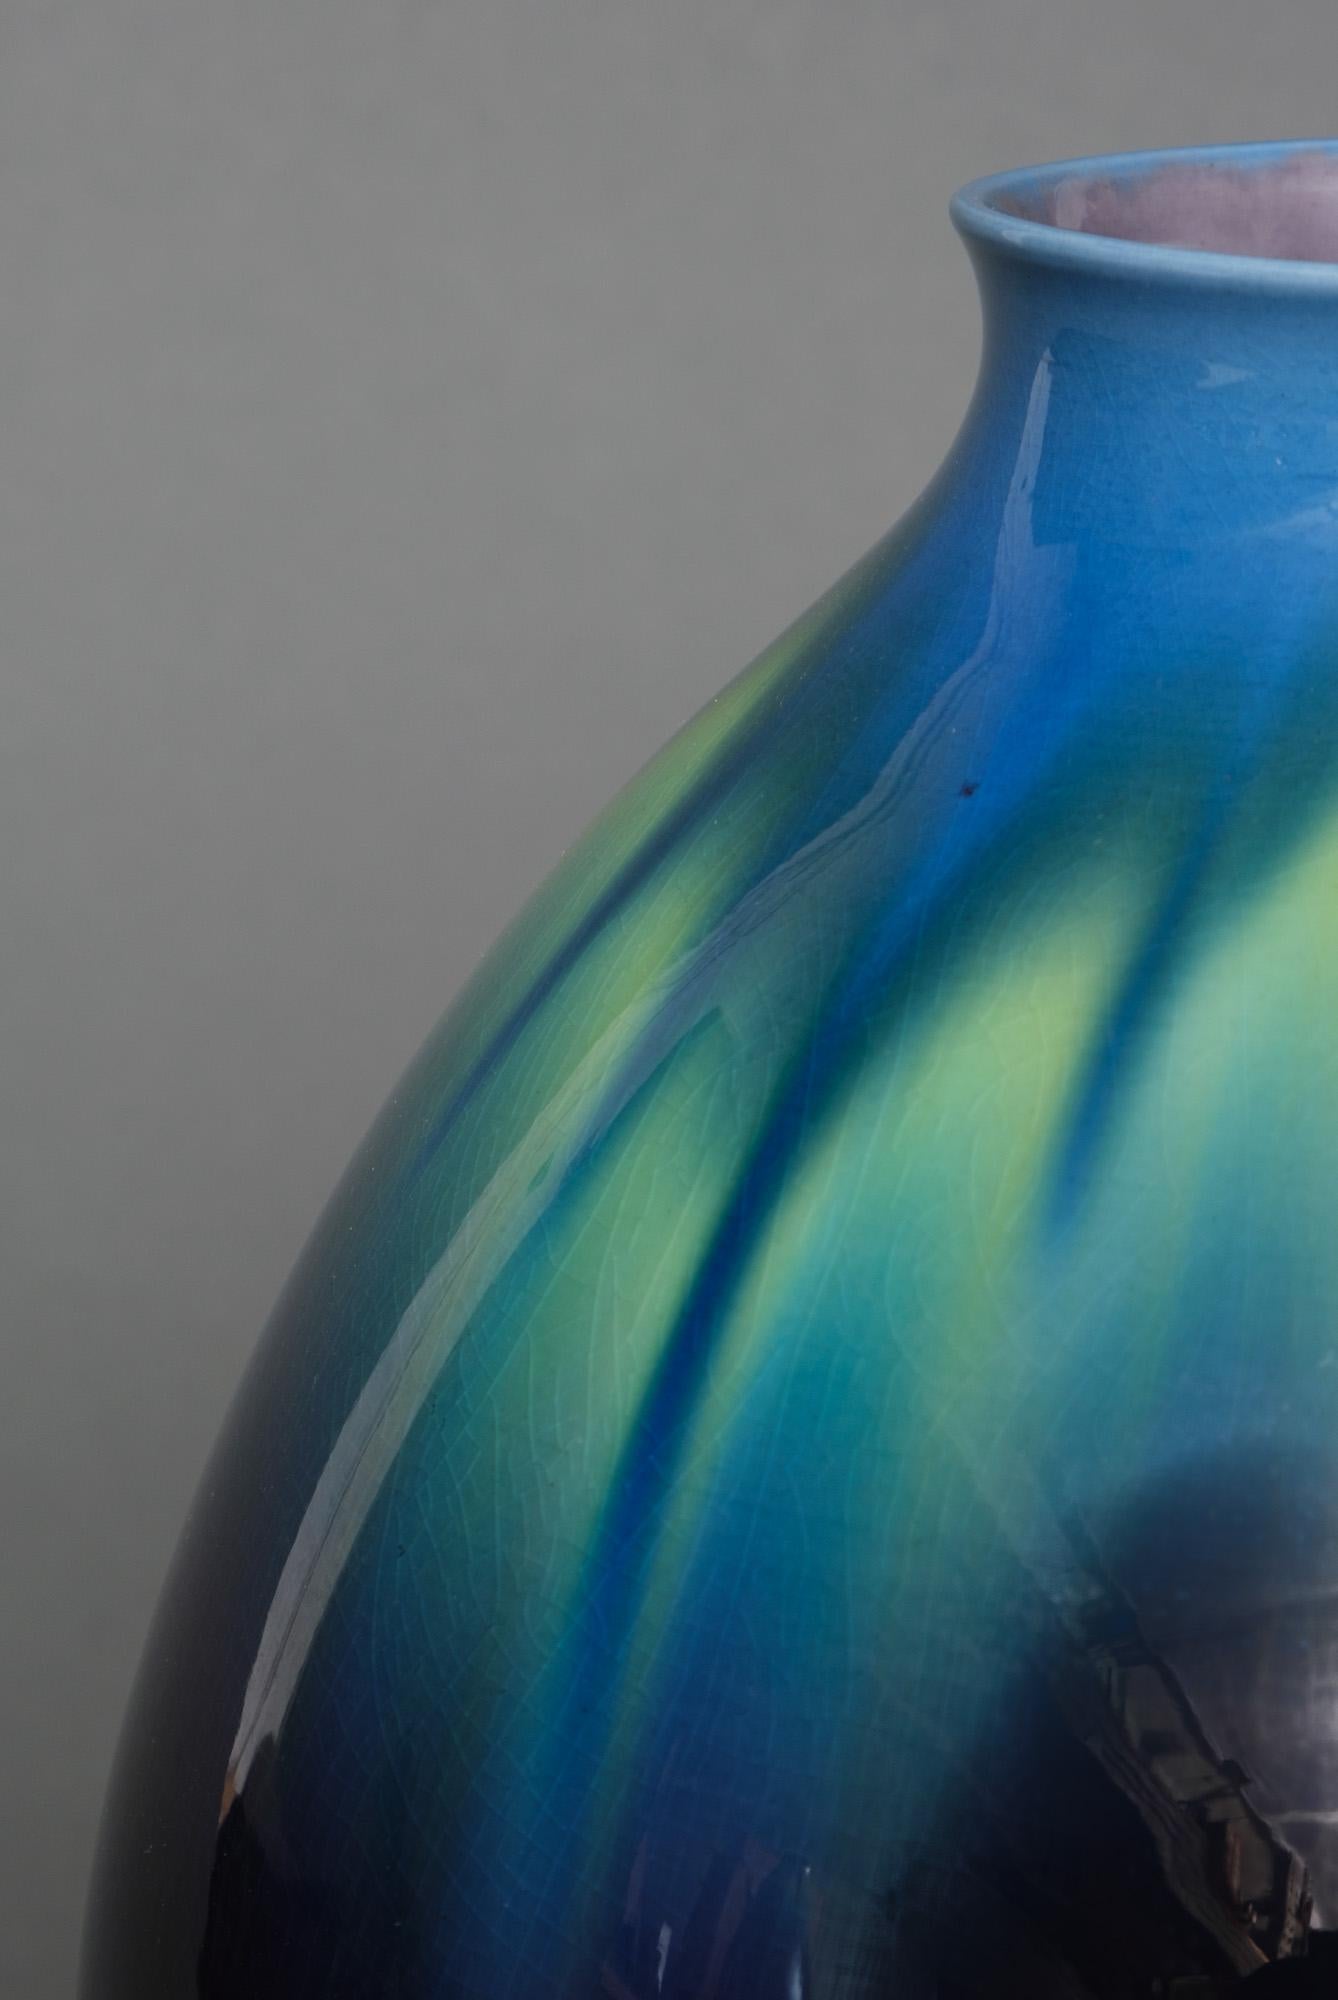 Magnificent Kutani-ware porcelain vase of broad bluster shape by the famous artist Tokuda Yasokichi III (Masahiko) (1933-2009). Its body decorated with his beautiful iconic ‘saiyu’ glaze in transcending shades of black, lime green and azure